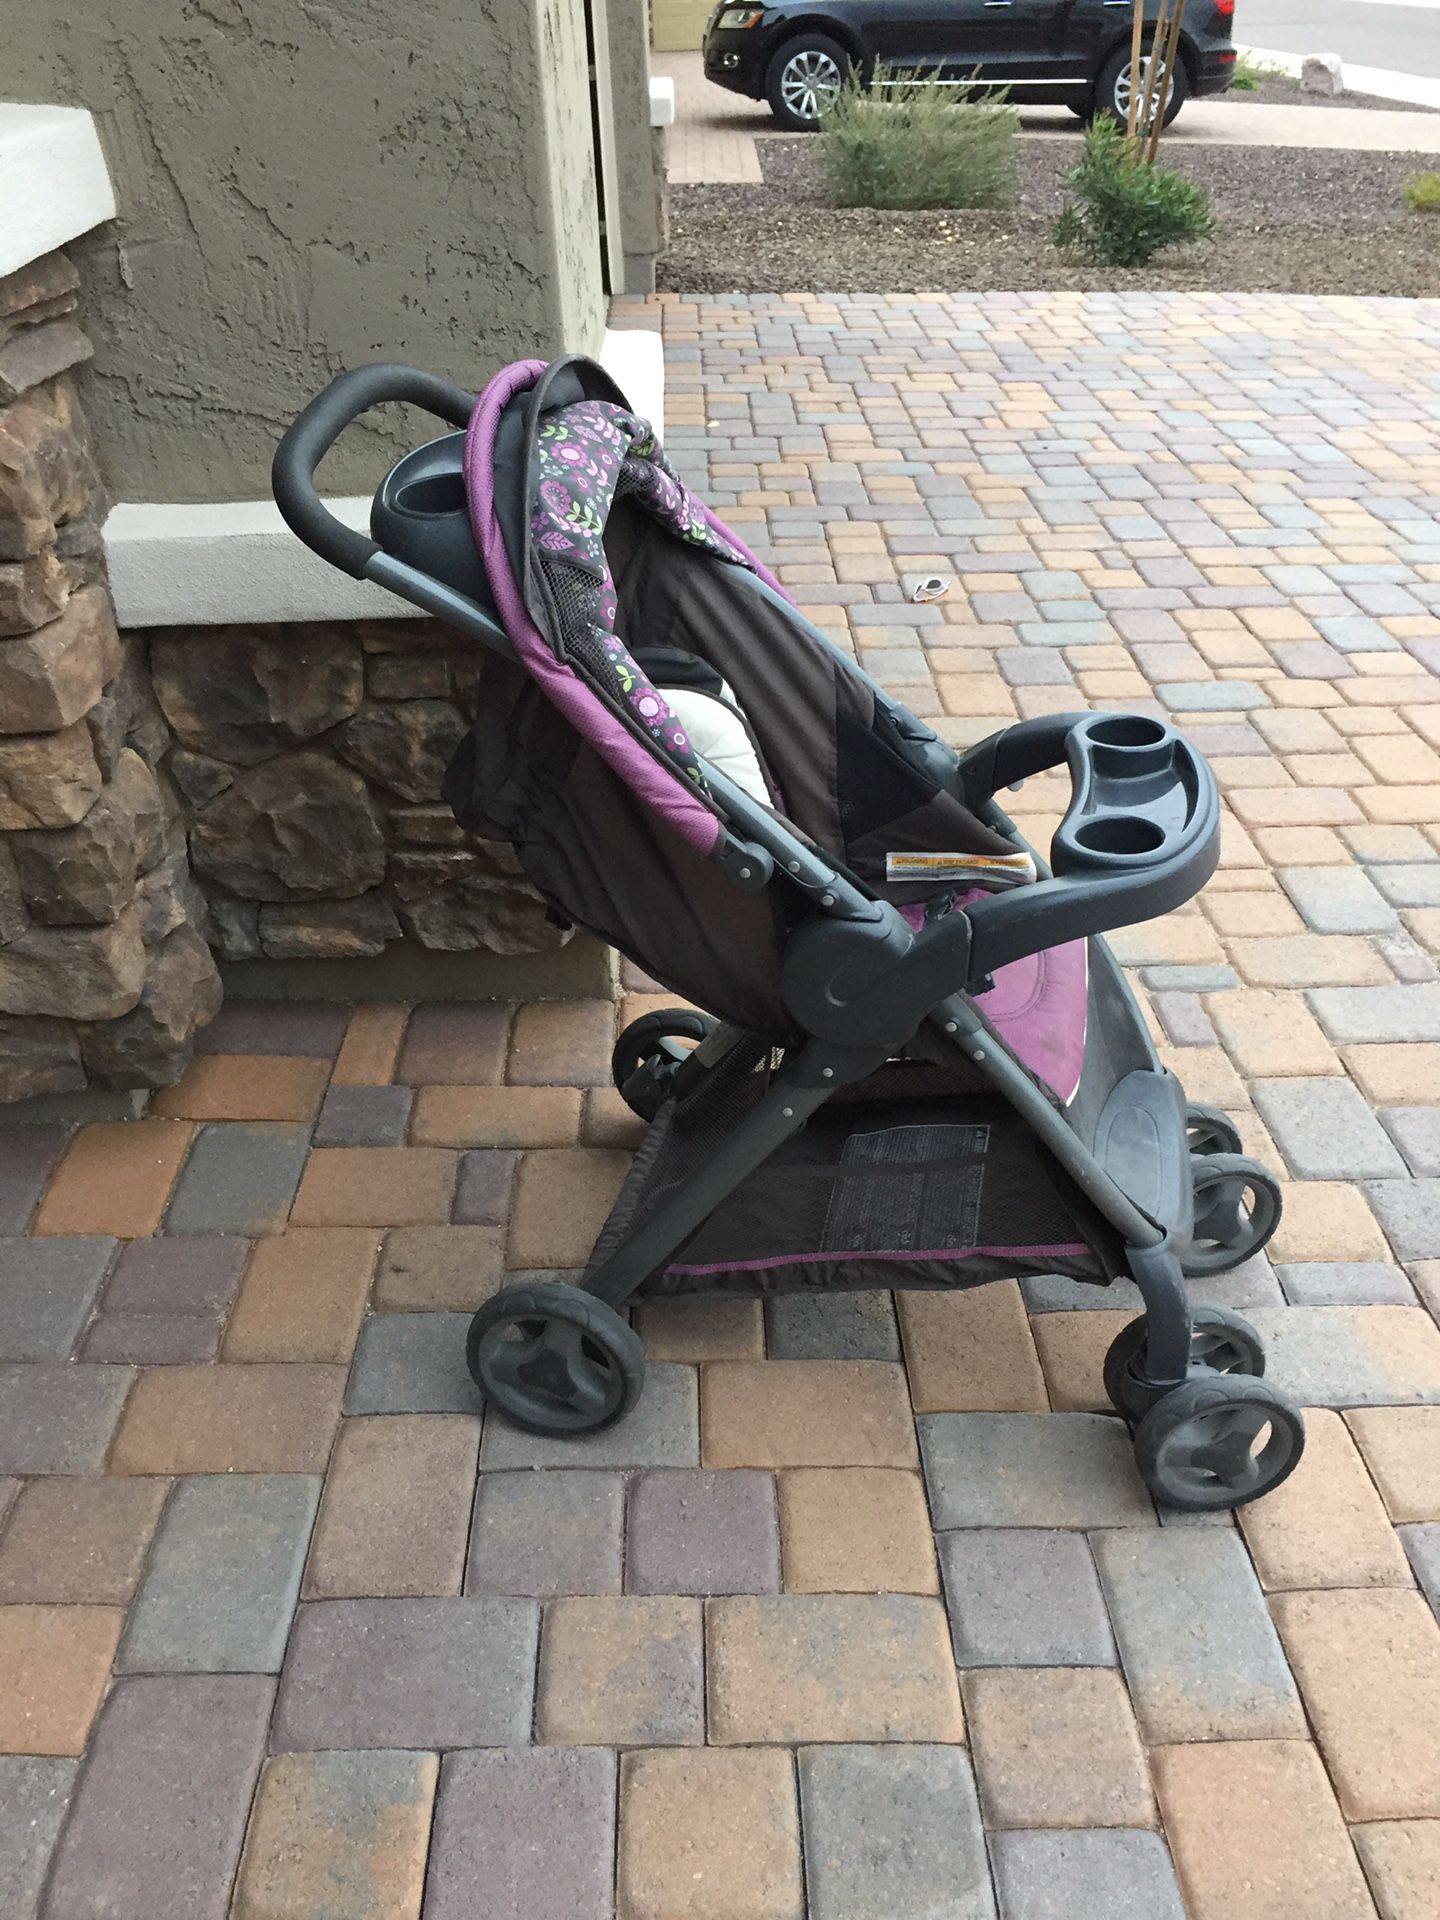 Graco baby stroller, car seat and 2 bases